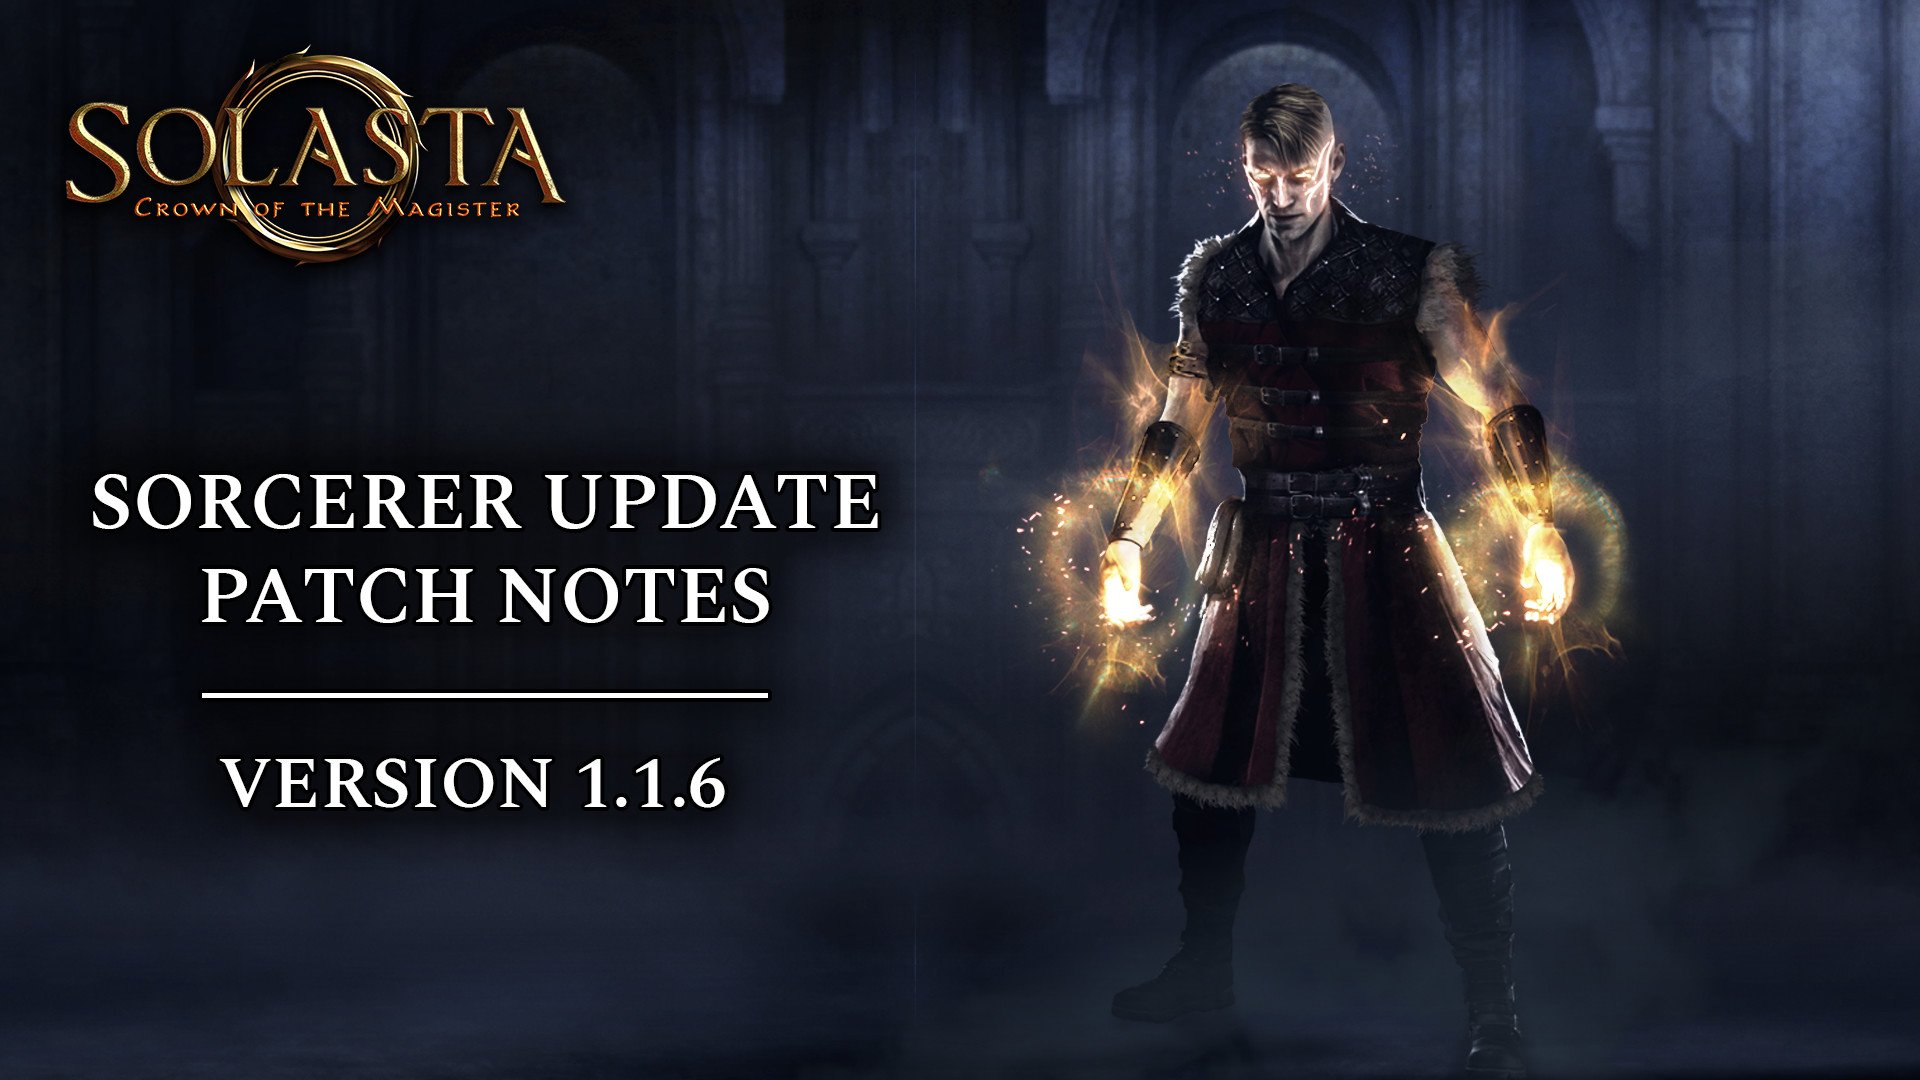 Sorcerer Update Patch Notes